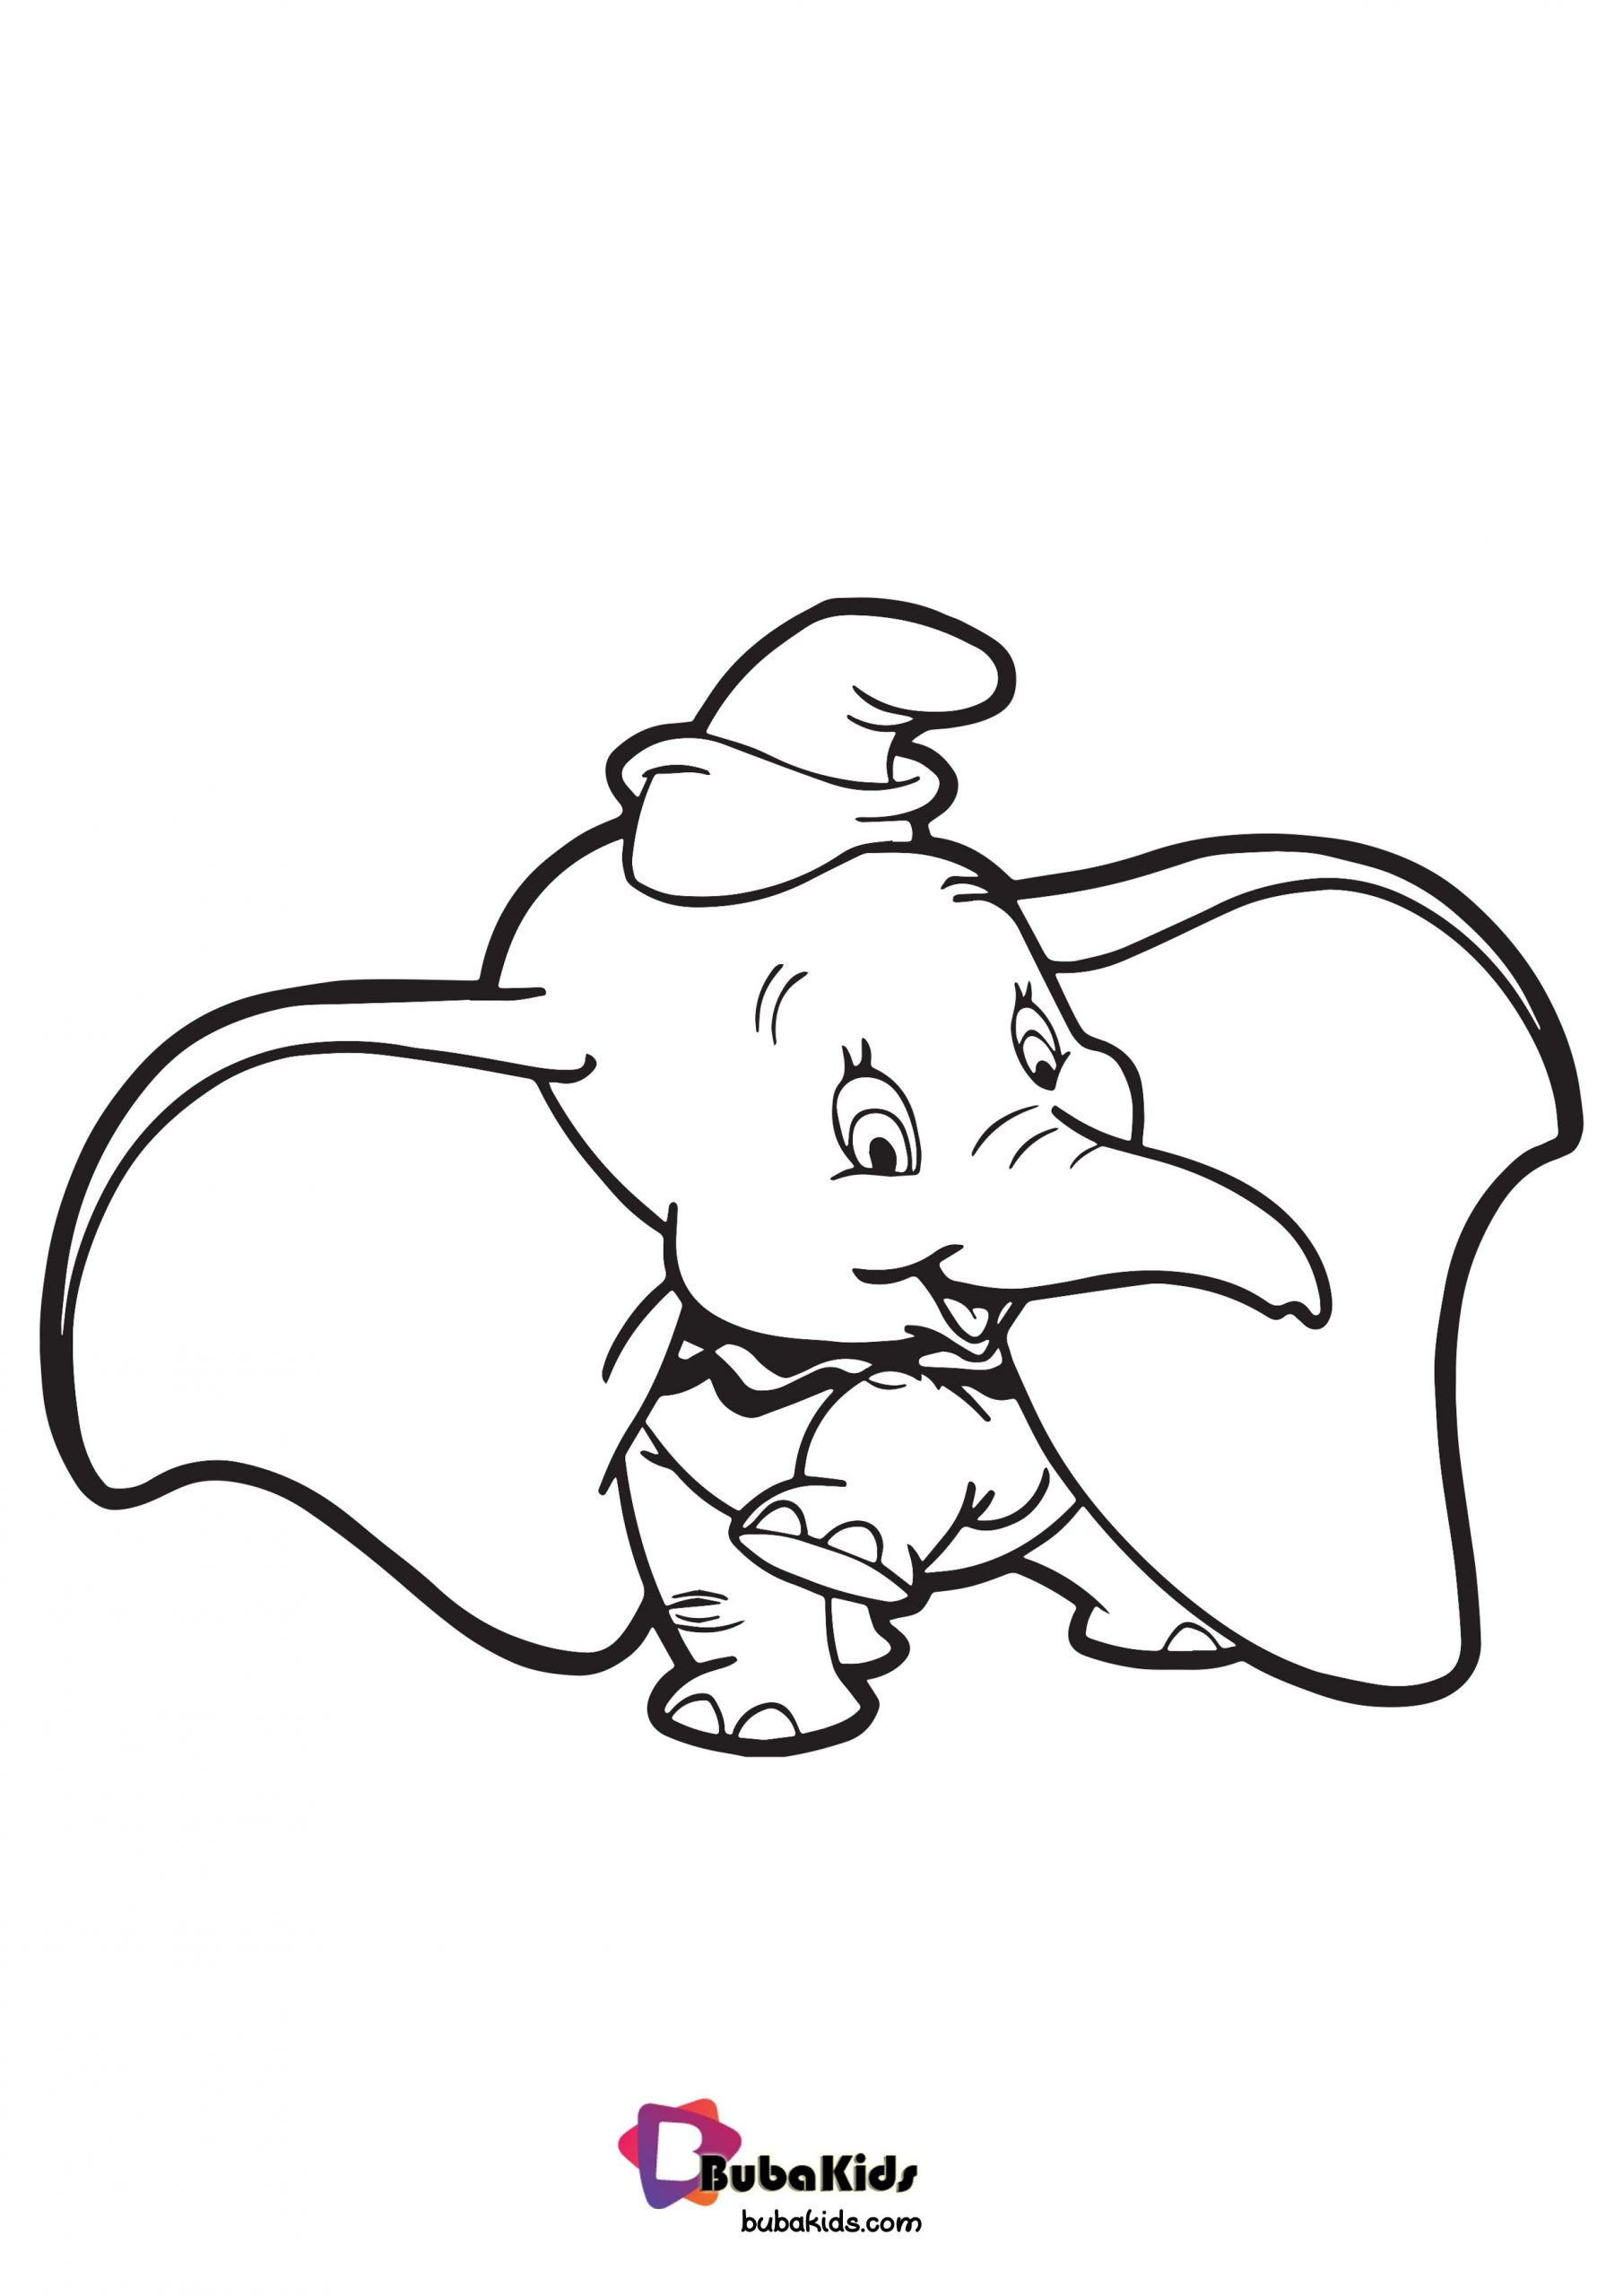 Disney Dumbo Elephant Coloring Page Wallpaper